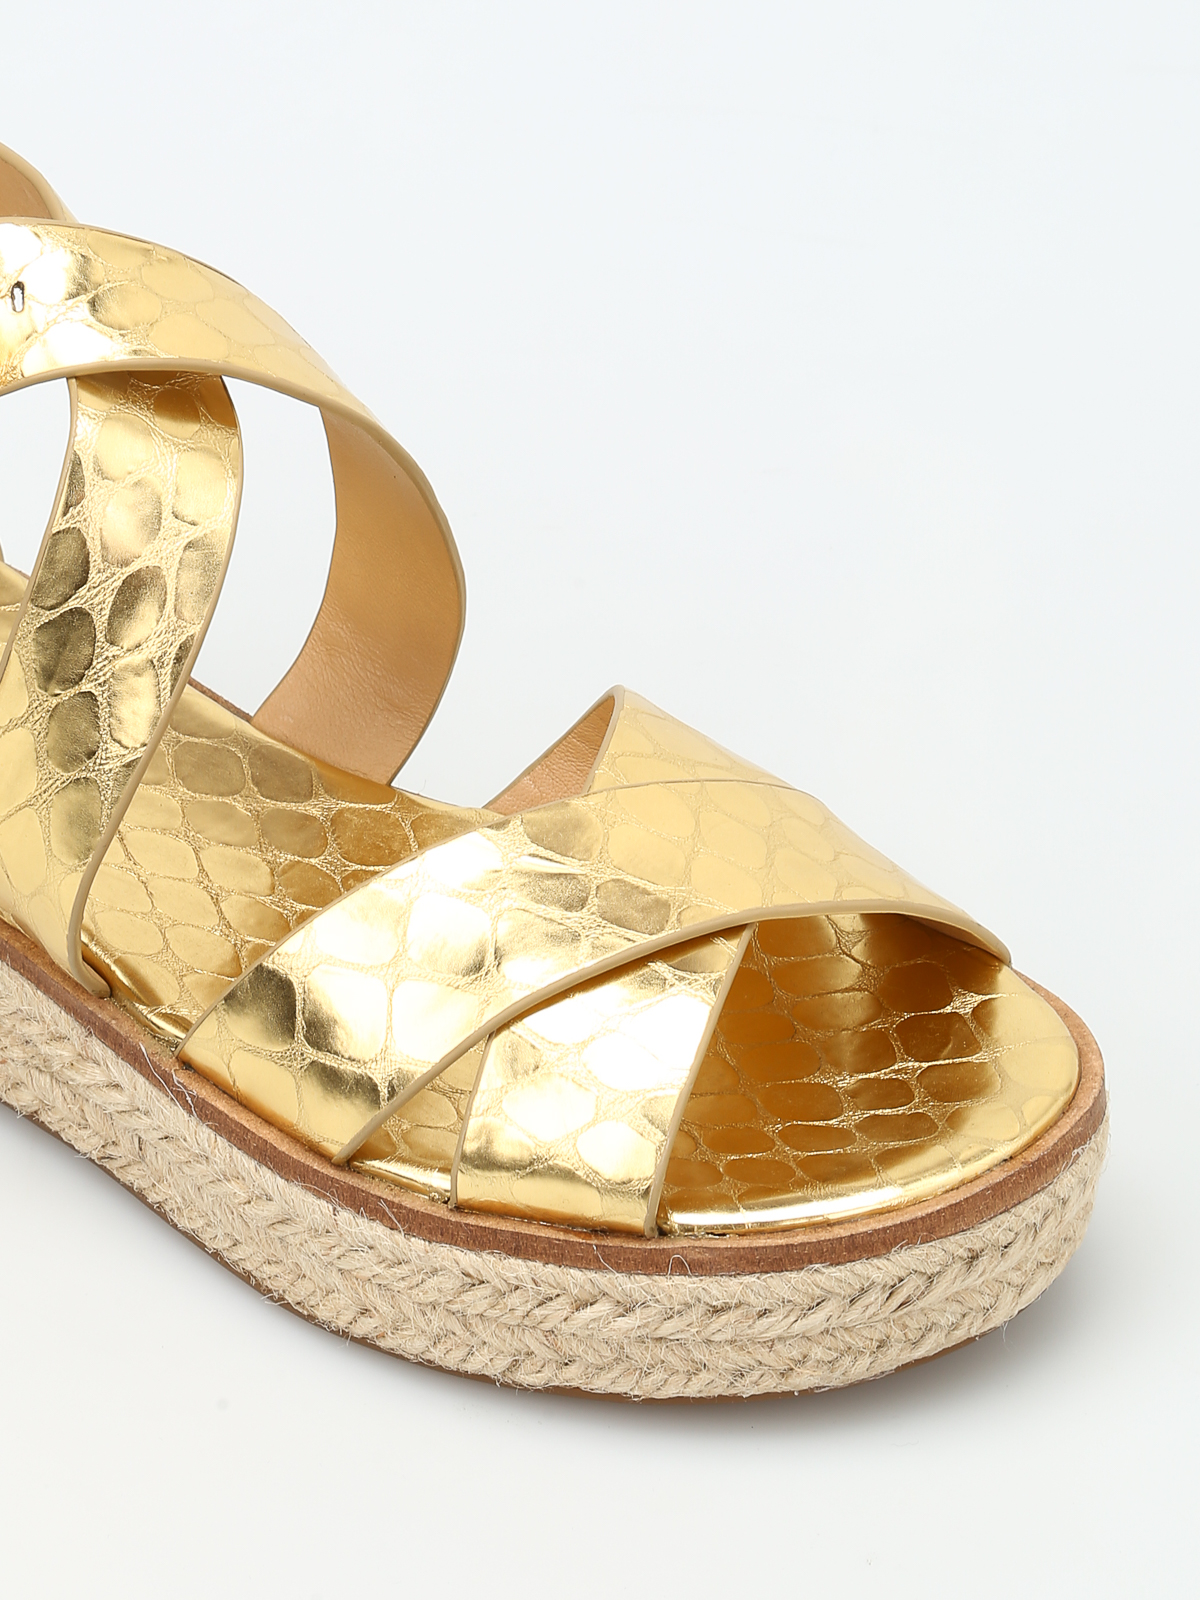 Sandals Michael Kors  Plate Thong sandals in gold color  40R4MKFA1M740